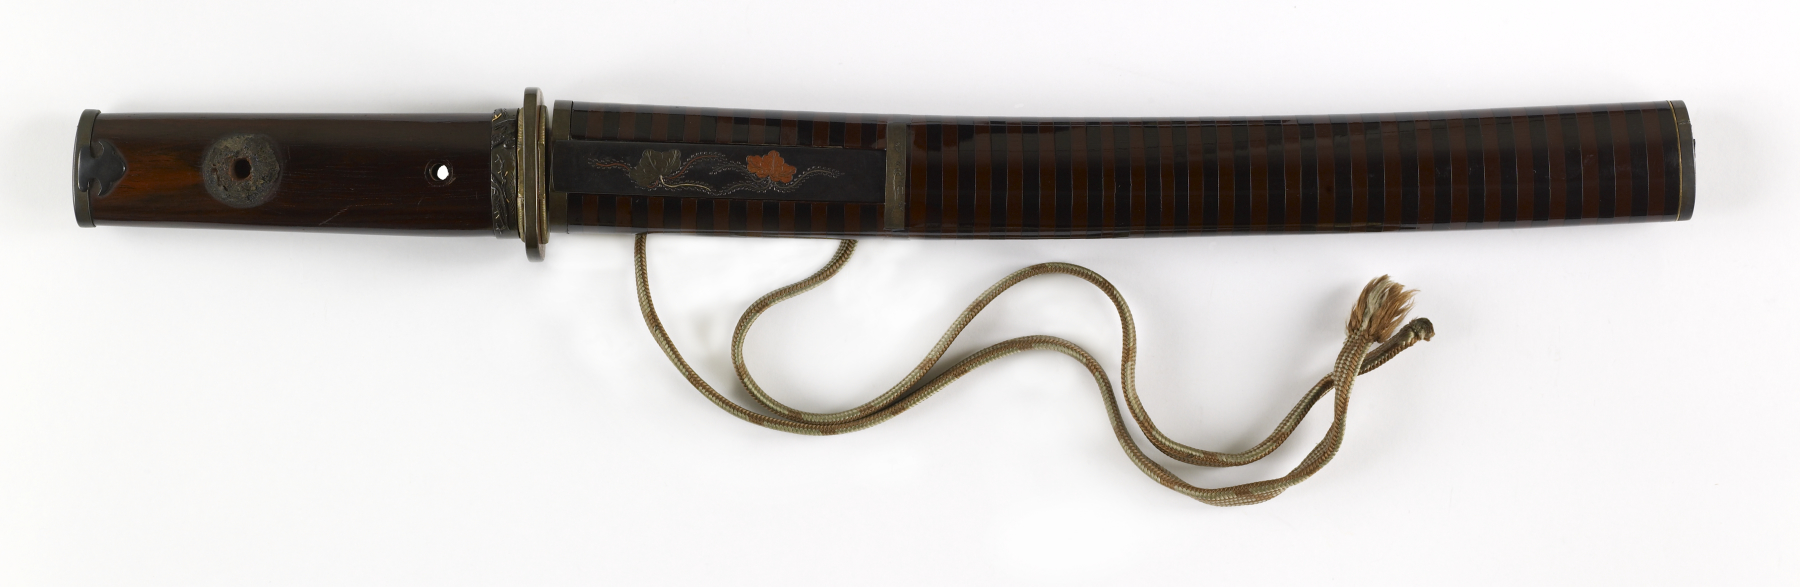 Image for Dagger (yari) with brown lacquer saya with dark brown bands (includes 51.1251.1-51.1251.2)